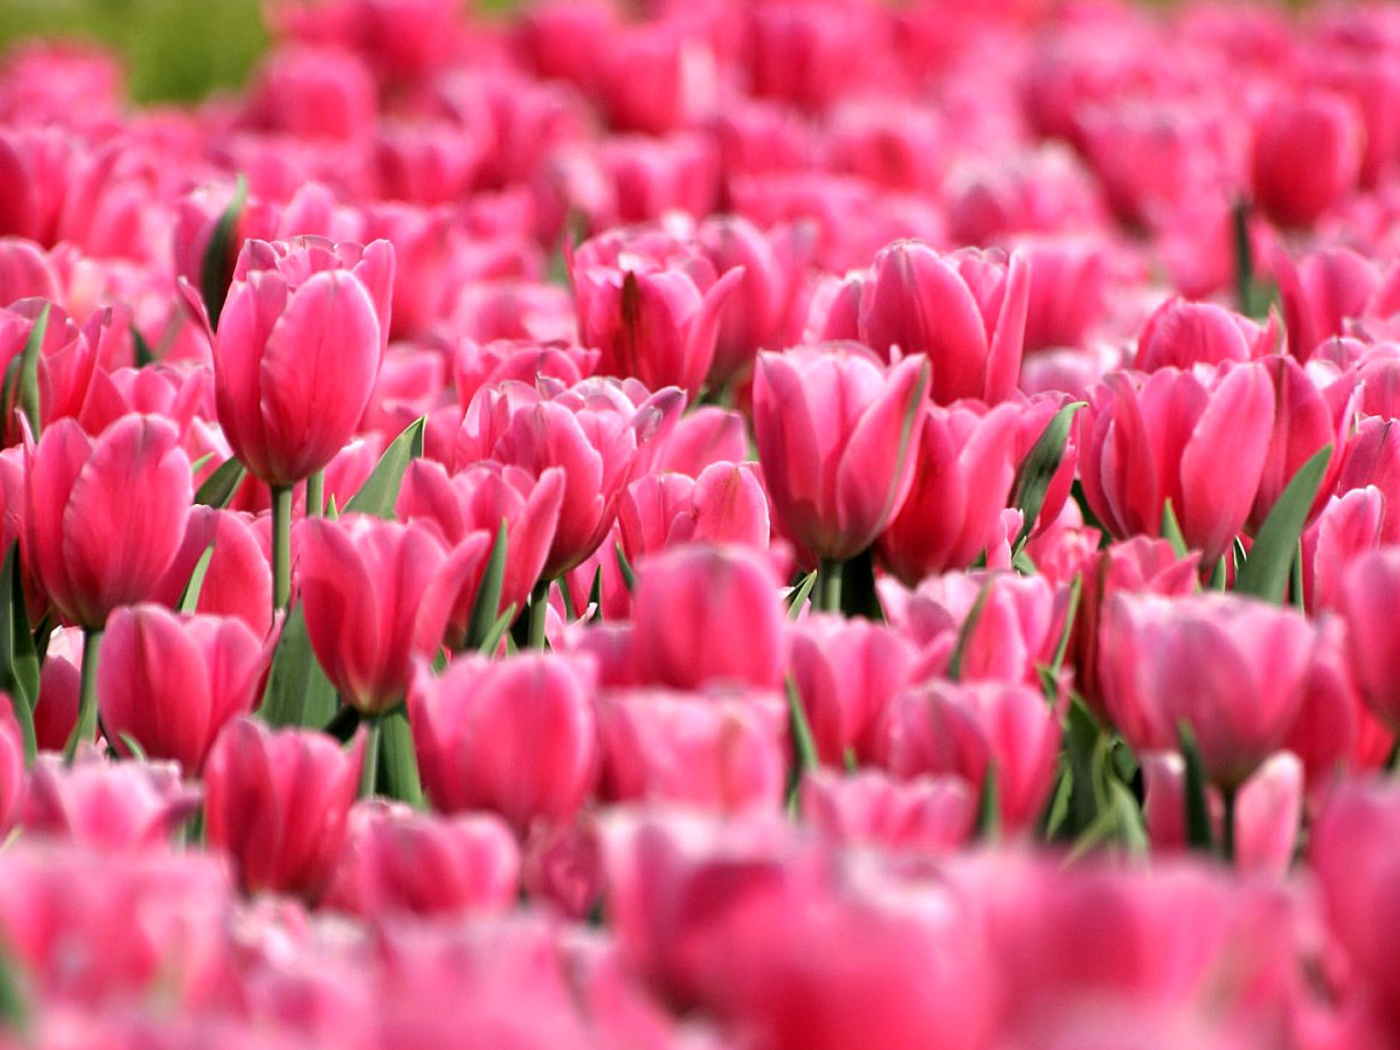 Das Pink Tulips in Holland Festival Wallpaper 1400x1050